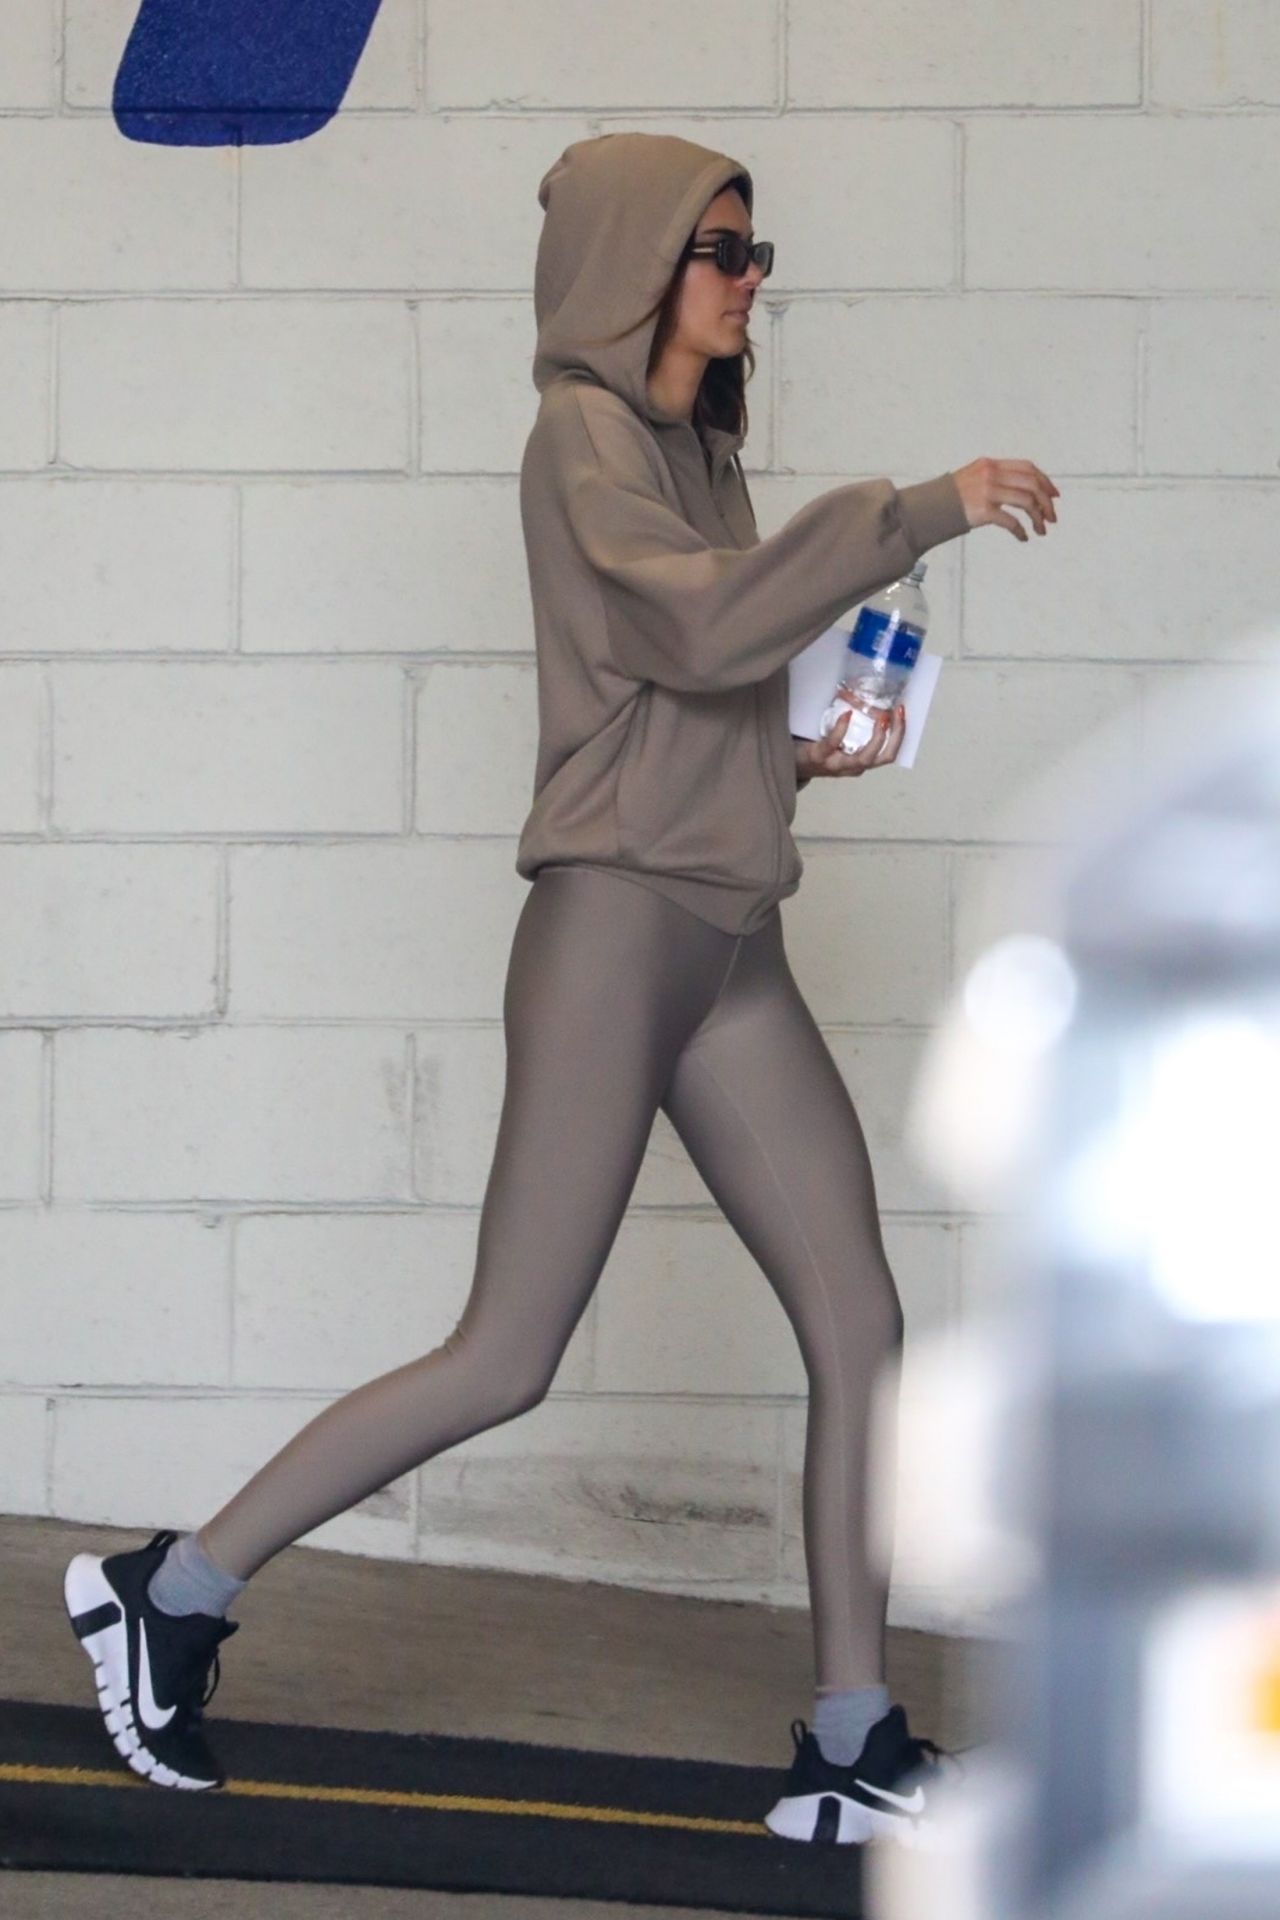 Kendall Jenner Got Her Workout In on Memorial Day!: Photo 4562875, Kendall  Jenner Photos